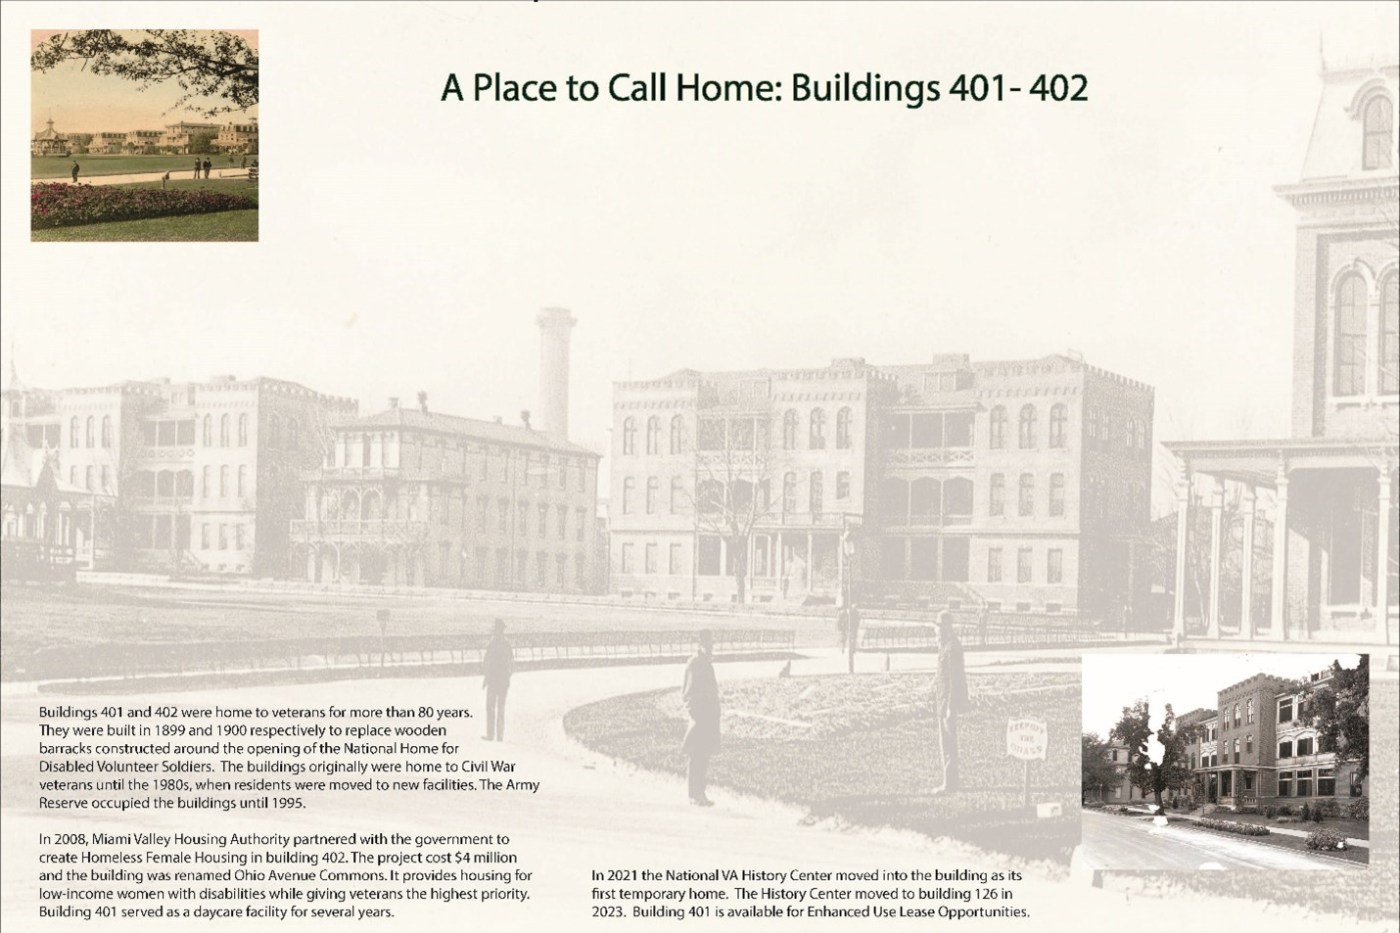 Draft interpretive panel for buildings 401 and 402.